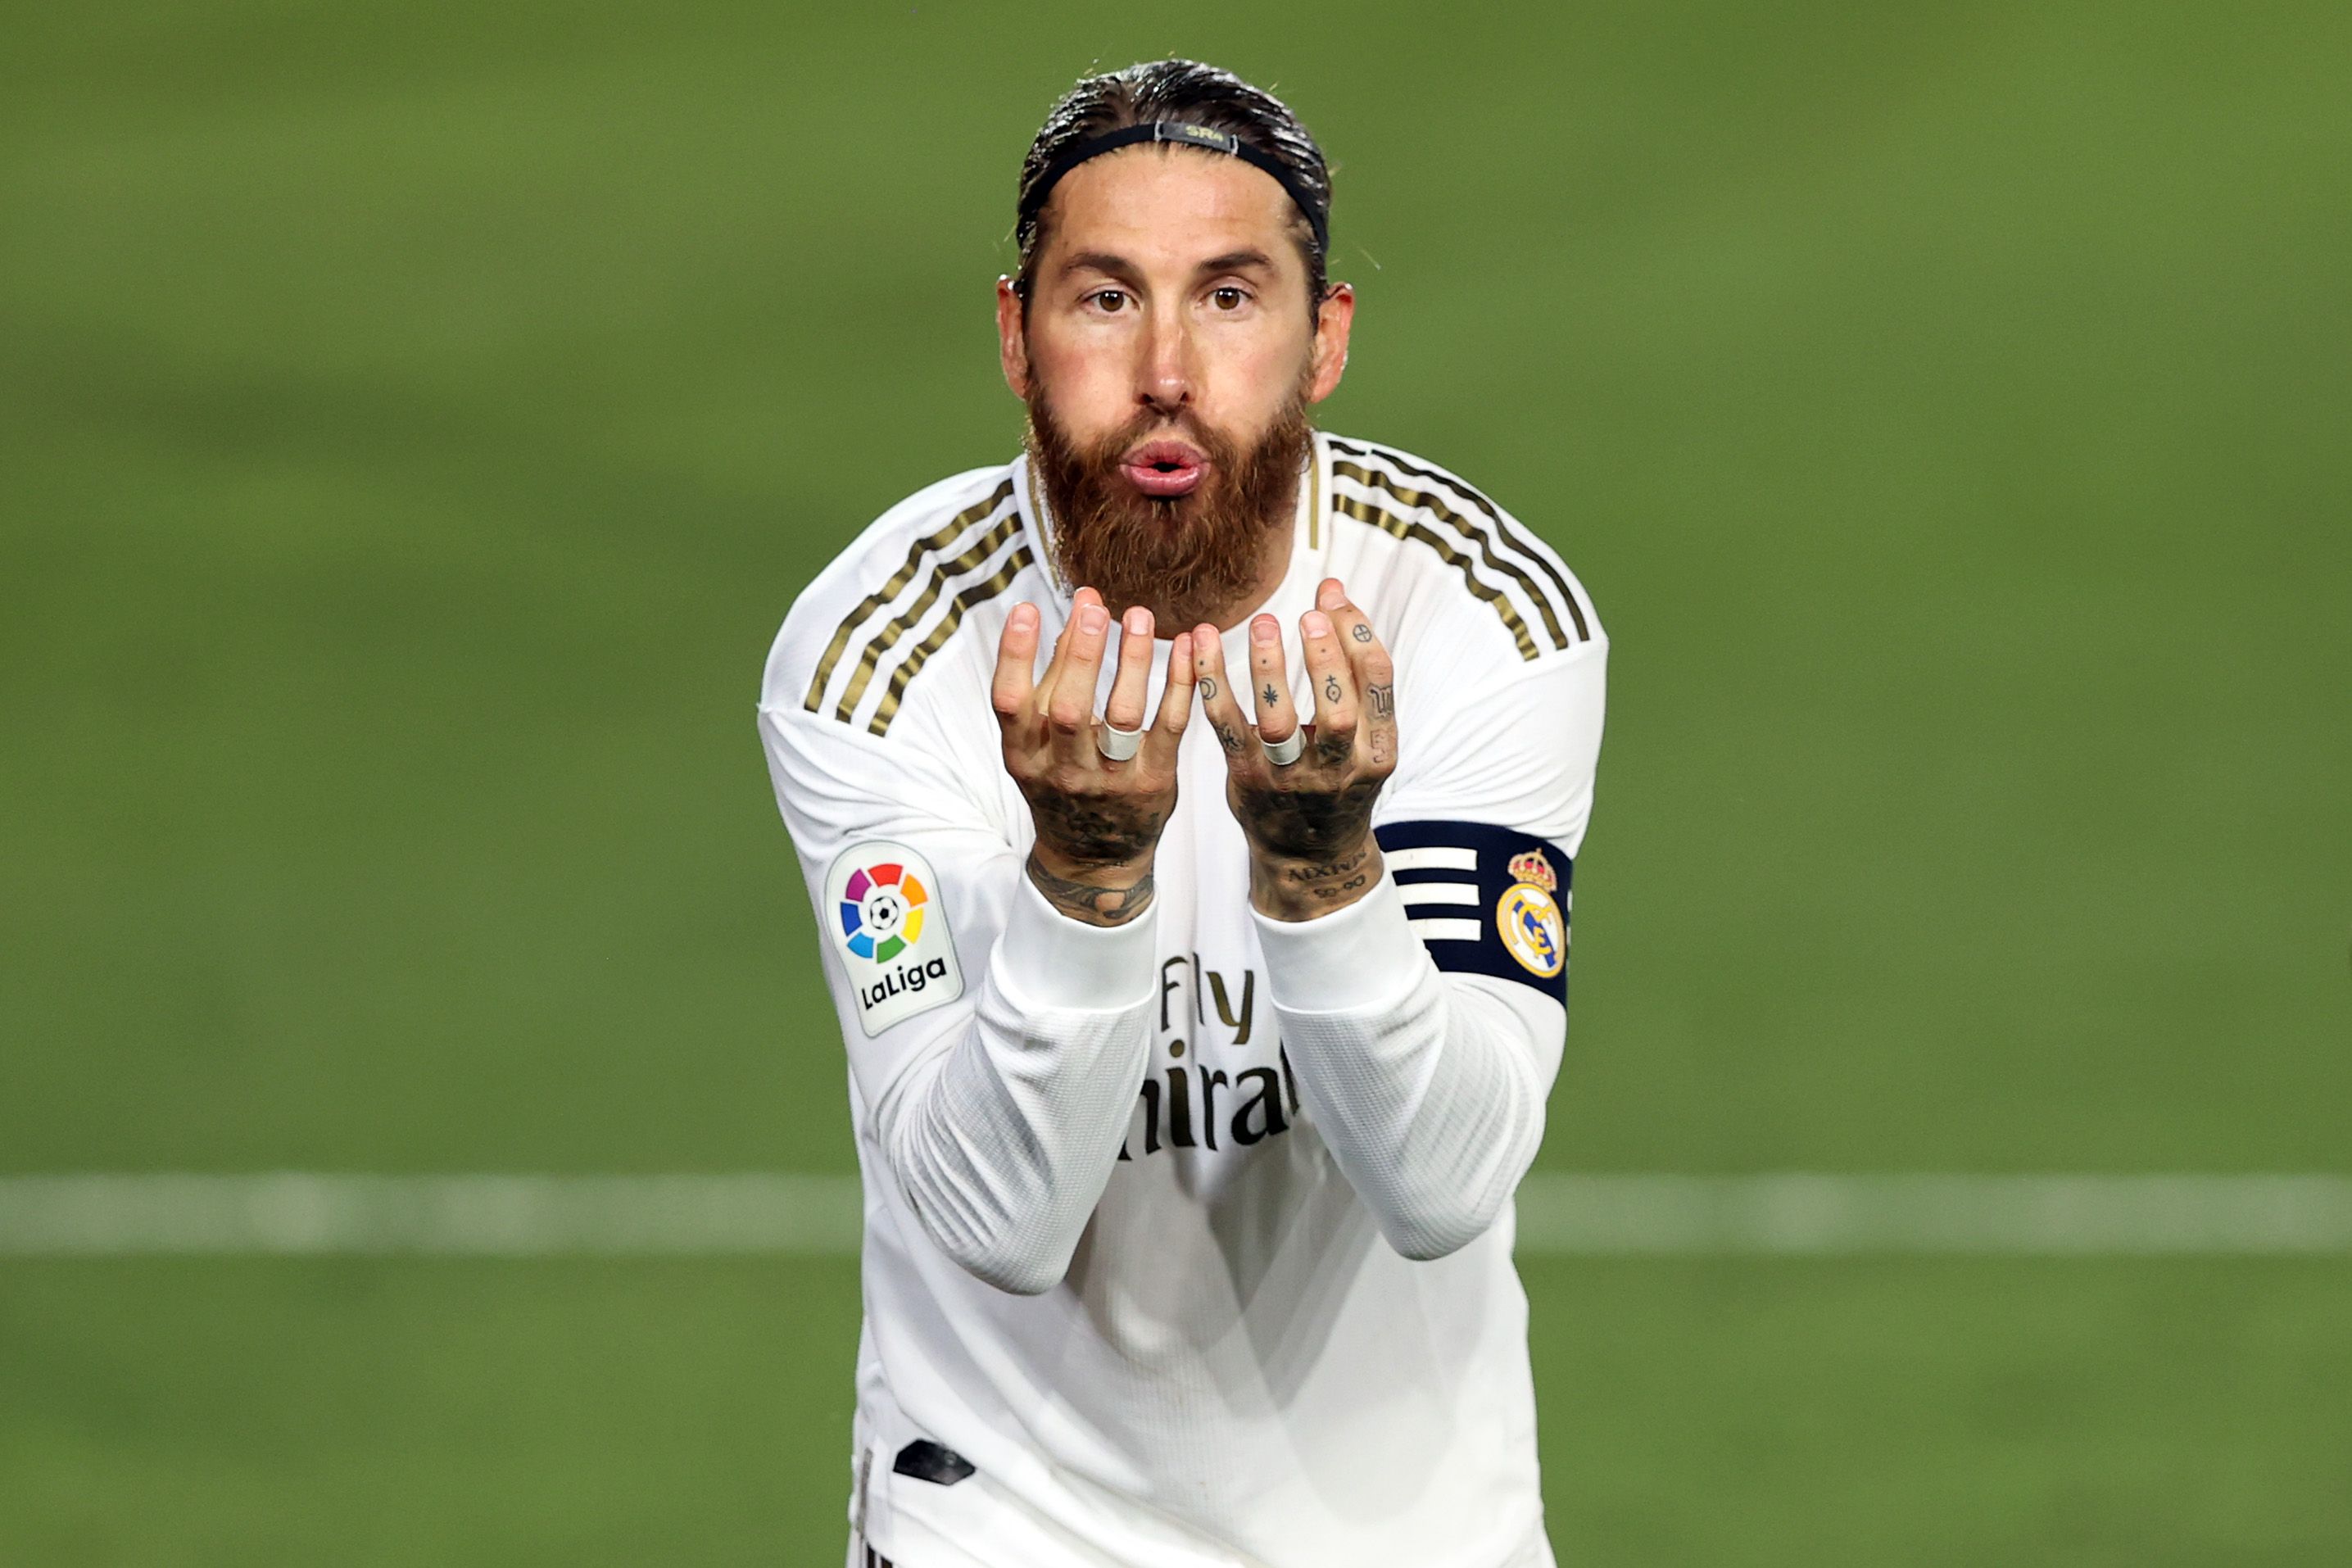 Sergio Ramos celebrating a goal for Real Madrid